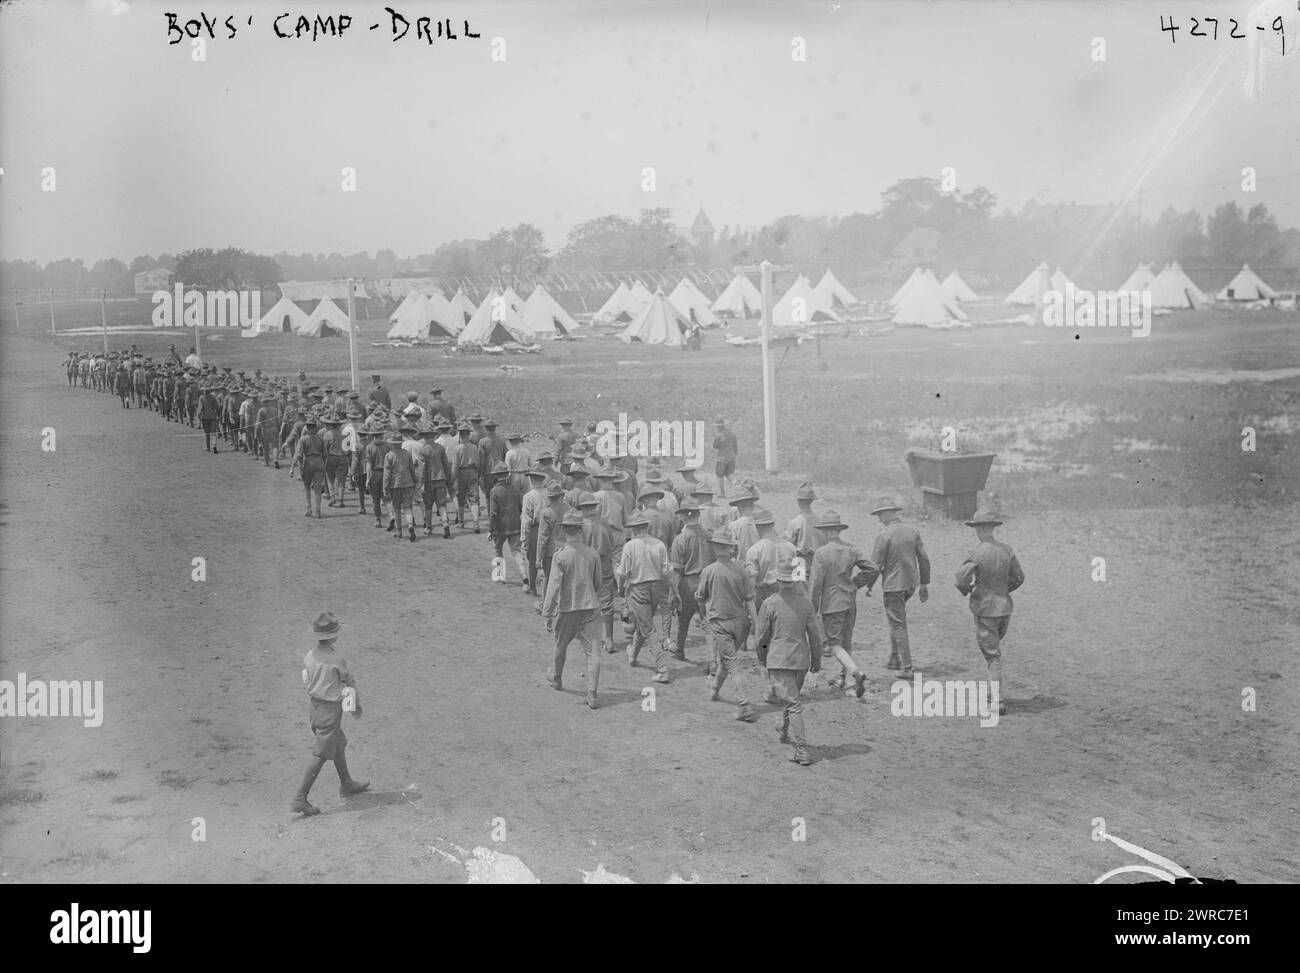 Boy's Camp drill, Photograph shows boys drilling at the summer military training camp for boys at Peekskill, New York. The camp was organized by the New York State Military Training Commission., 1917 July 16, Glass negatives, 1 negative: glass Stock Photo